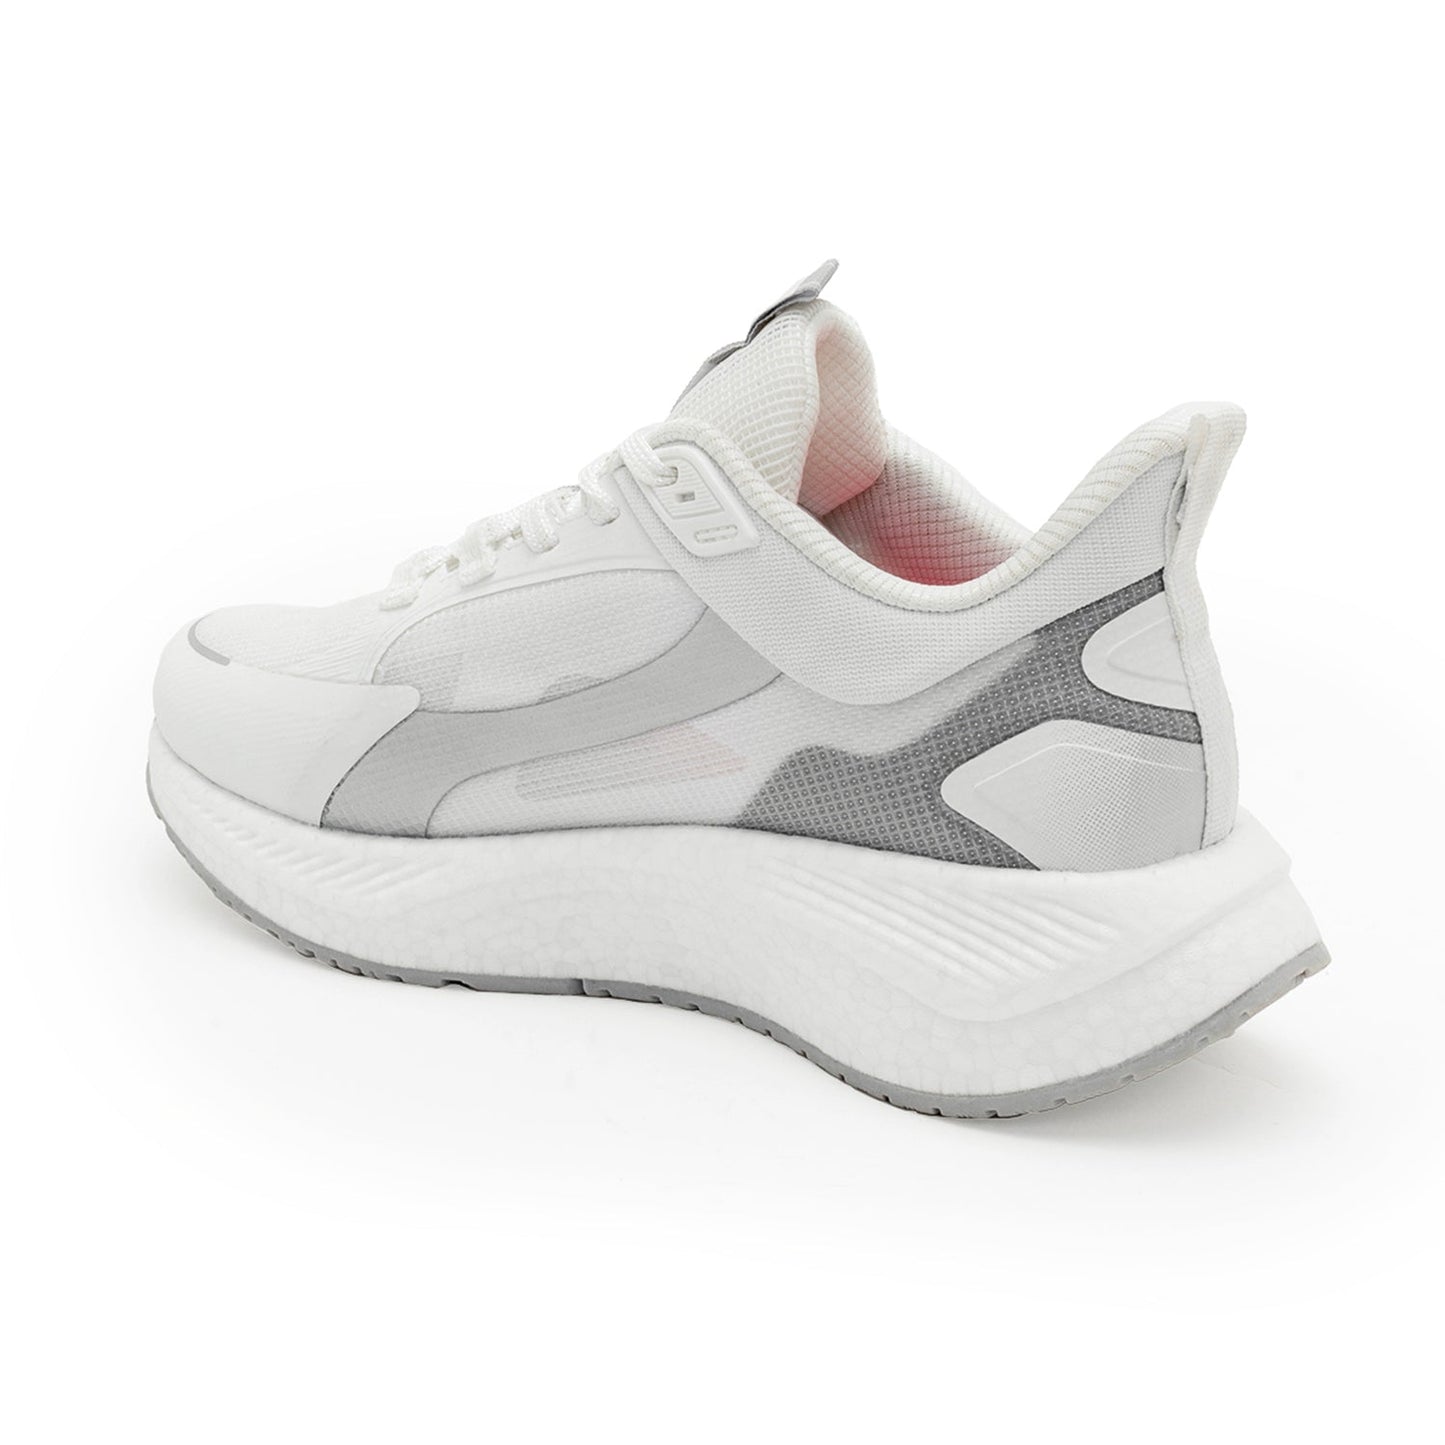 Red Tape Athleisure Sports Shoes for Women | Soft Cushioned Insole, Slip-Resistance, Dynamic Feet Support, Arch Support, Superior Bounce, Enhanced Comfort & Impact Mitigation